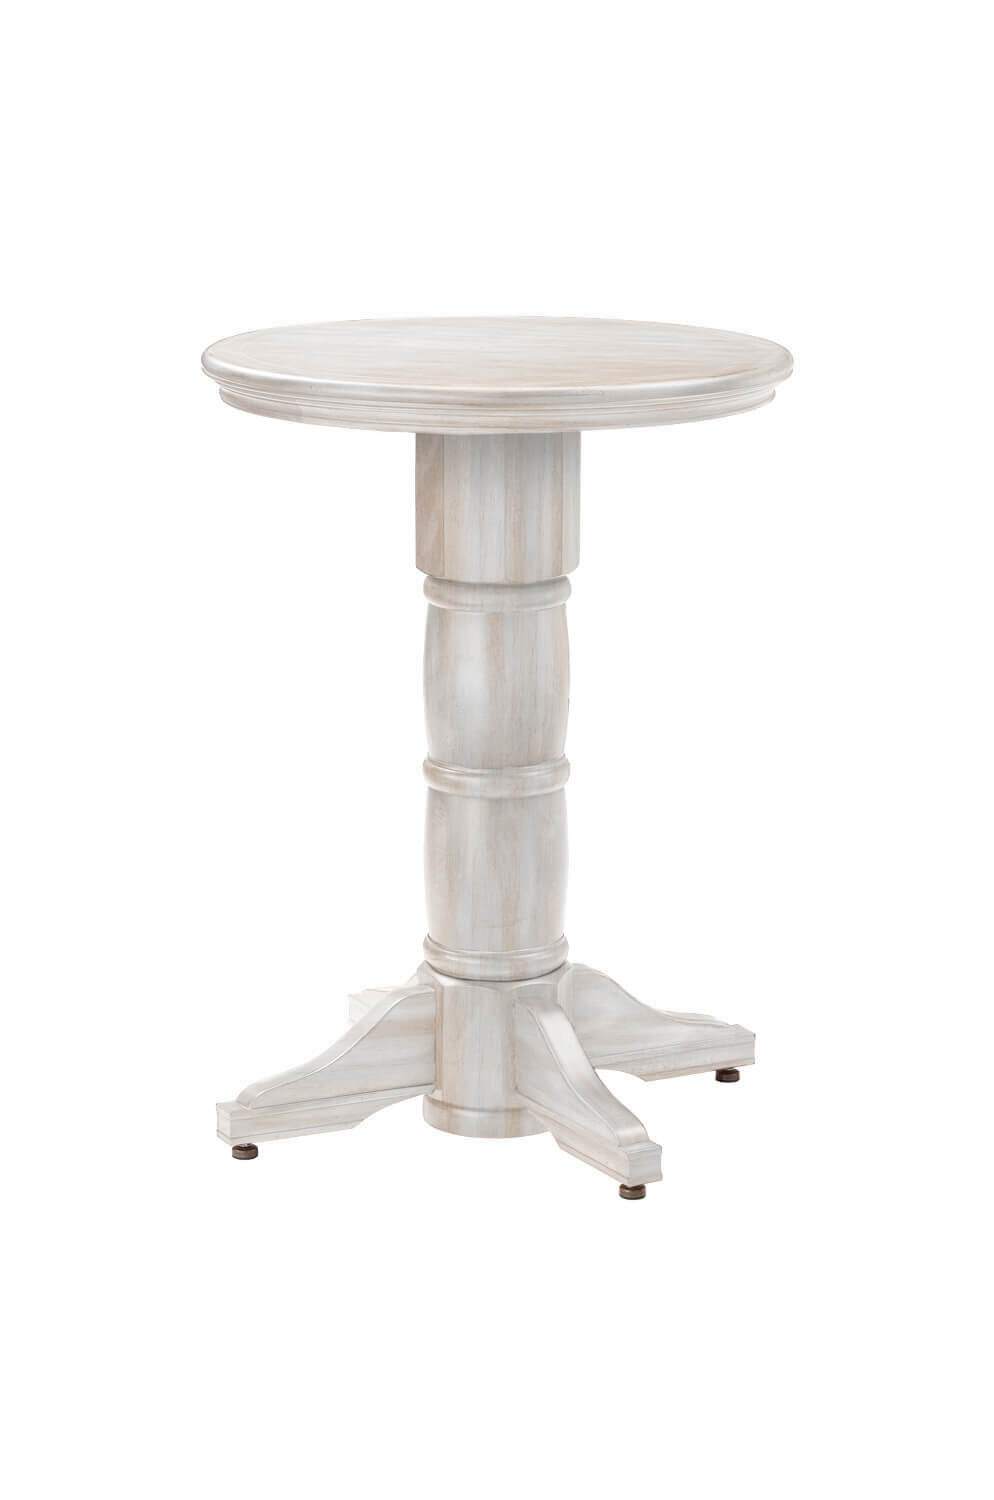 Darafeev's Del Mar Rustic Driftwood Pub Table with Round Top